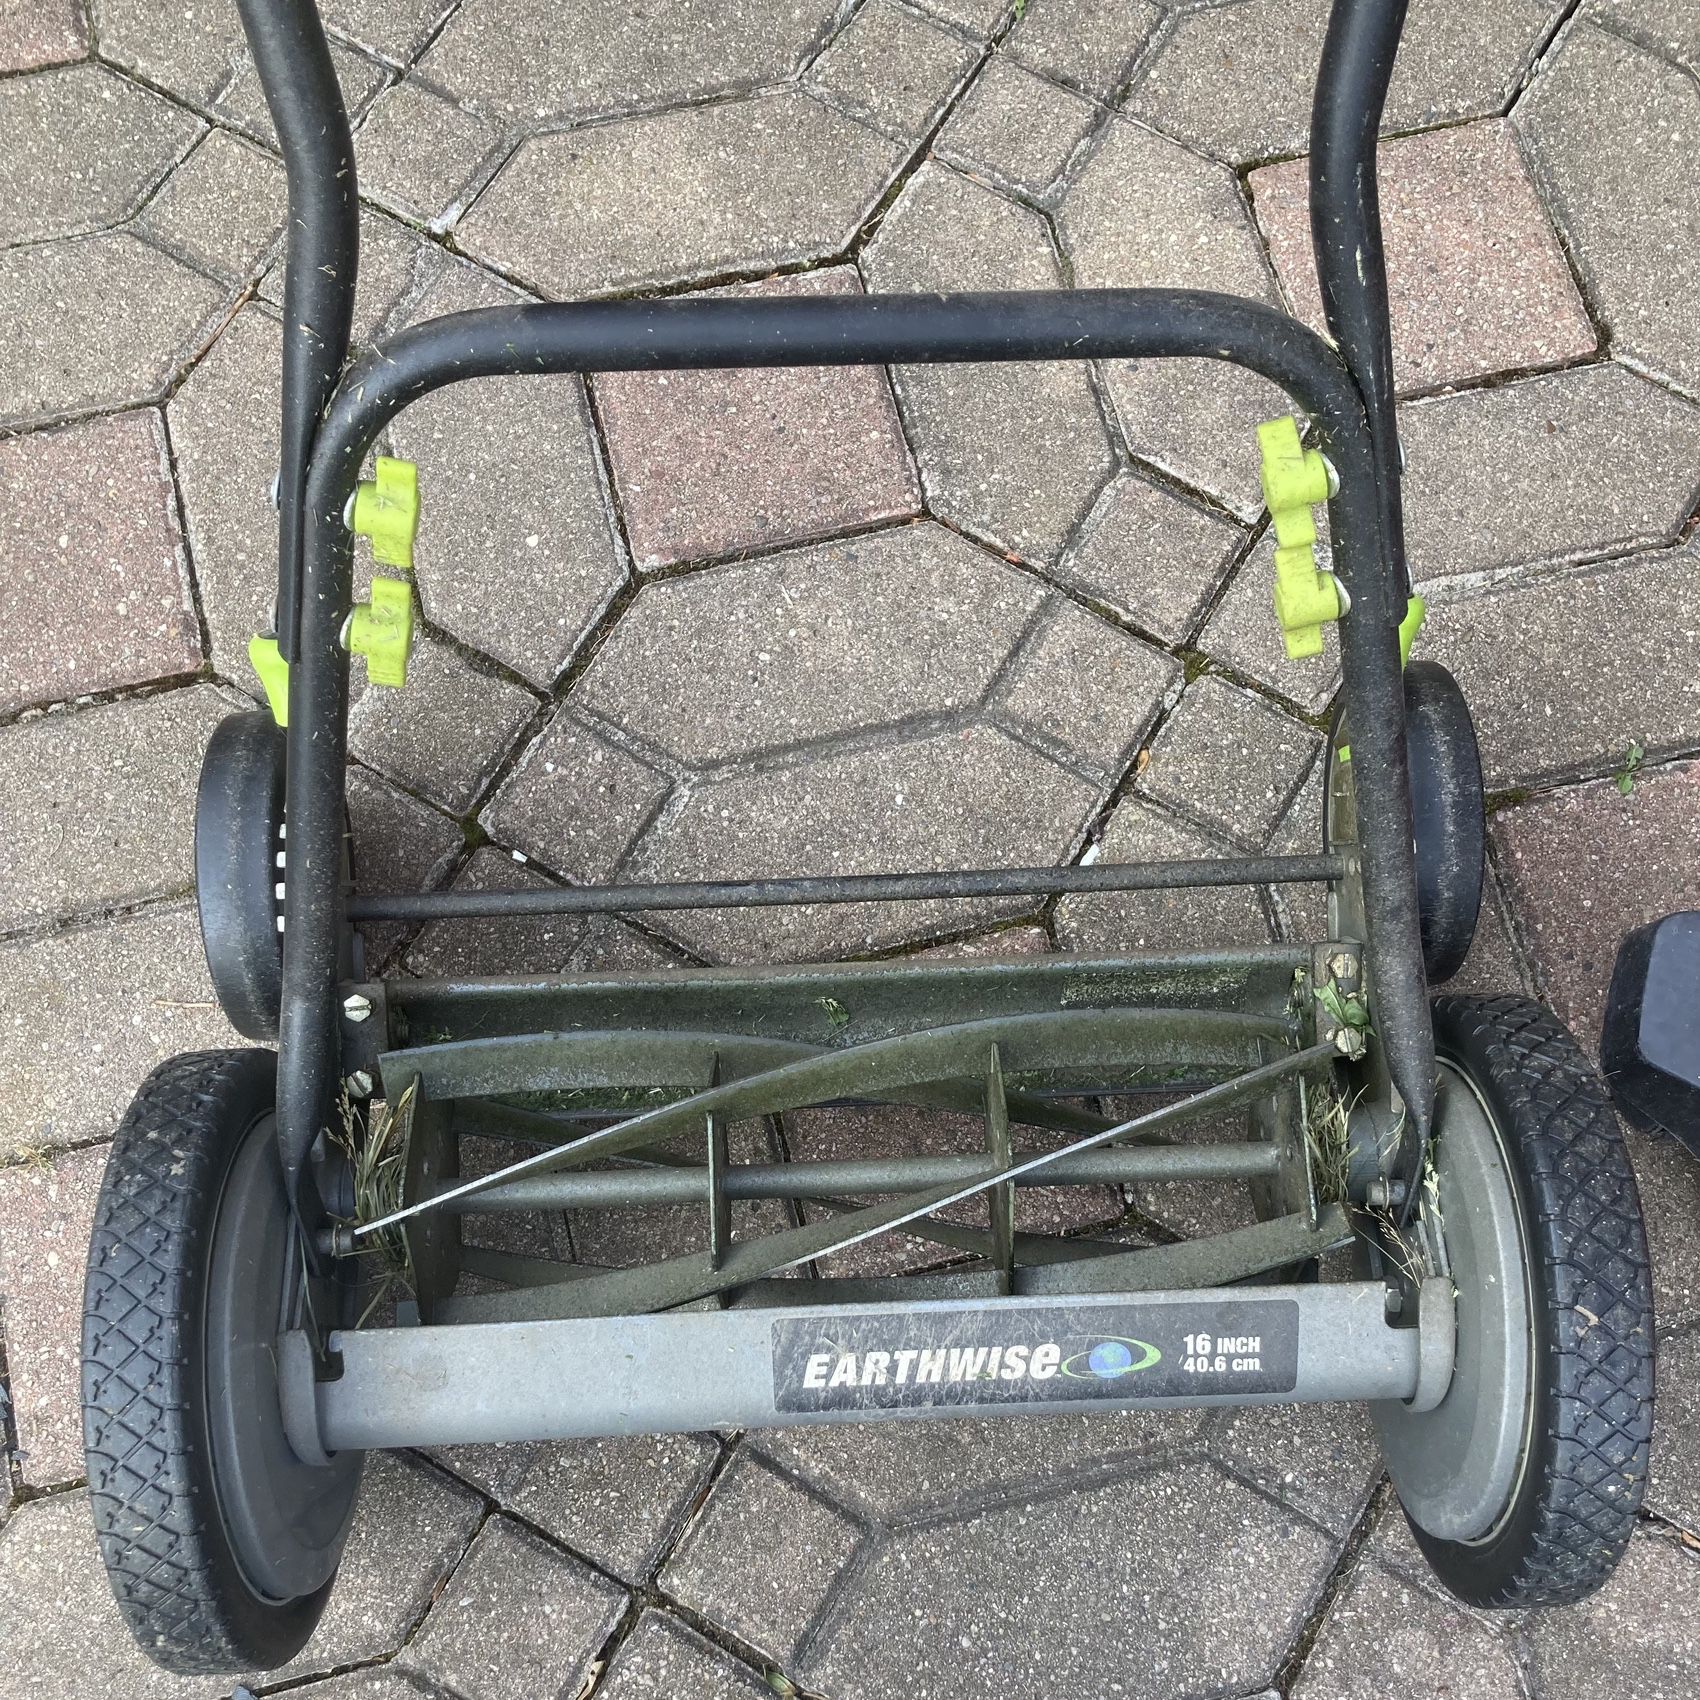 20 Inch Earthwise Reel Mower Assembly 